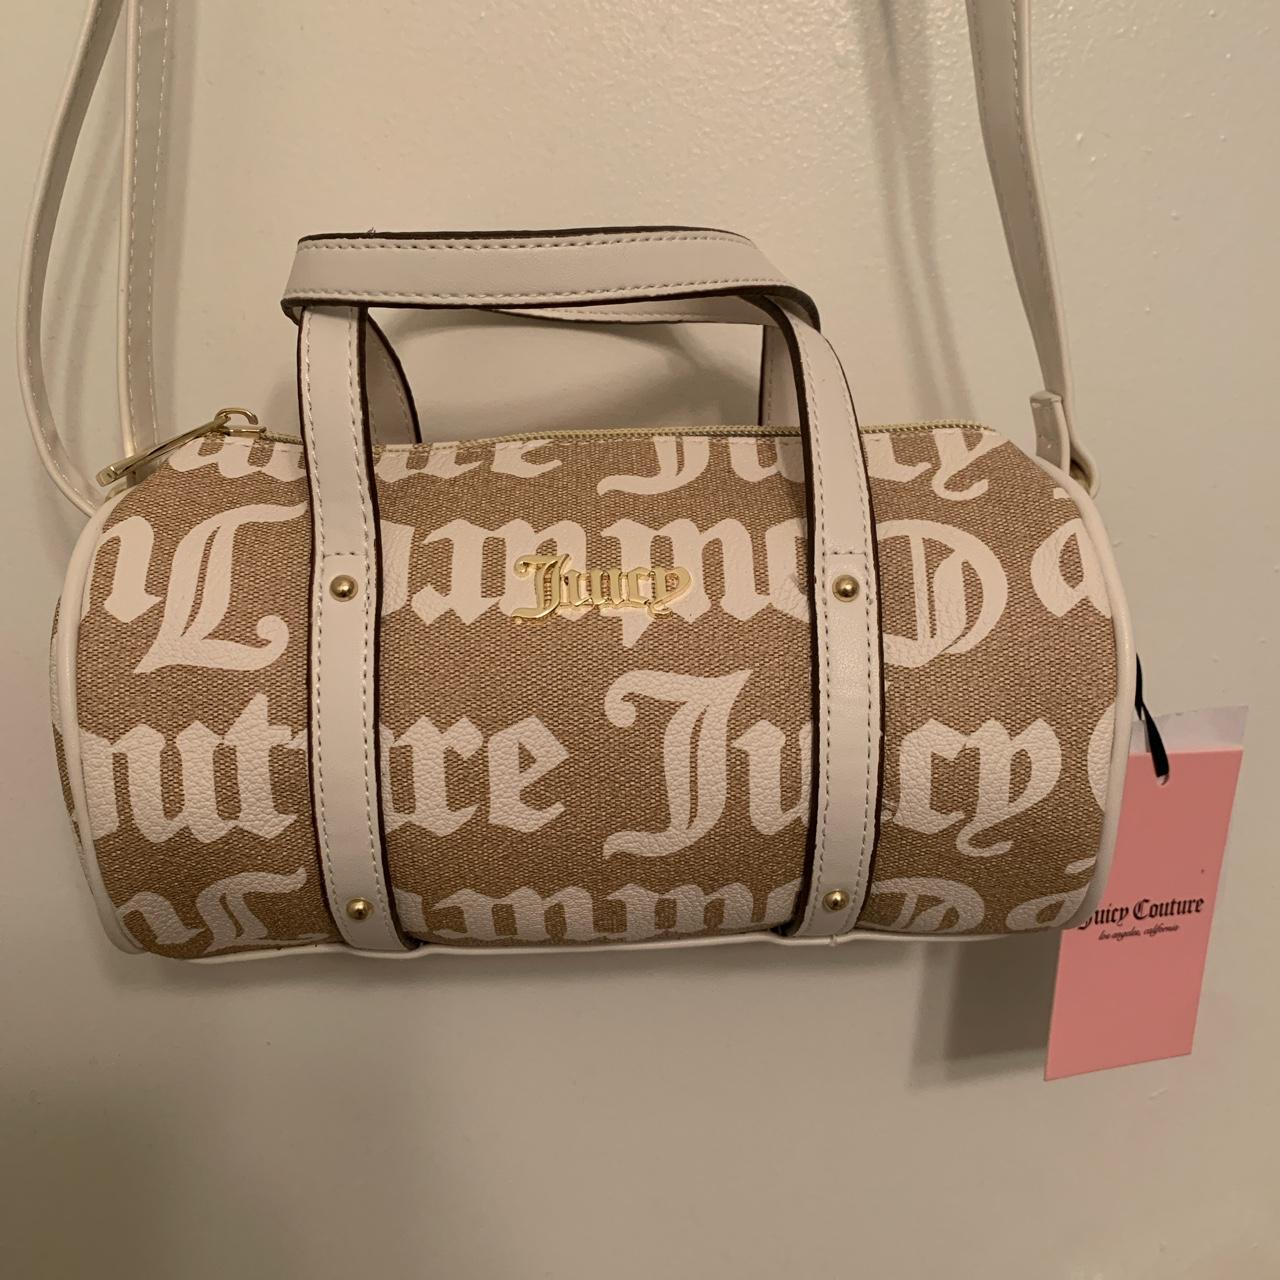 MM Couture, Bags